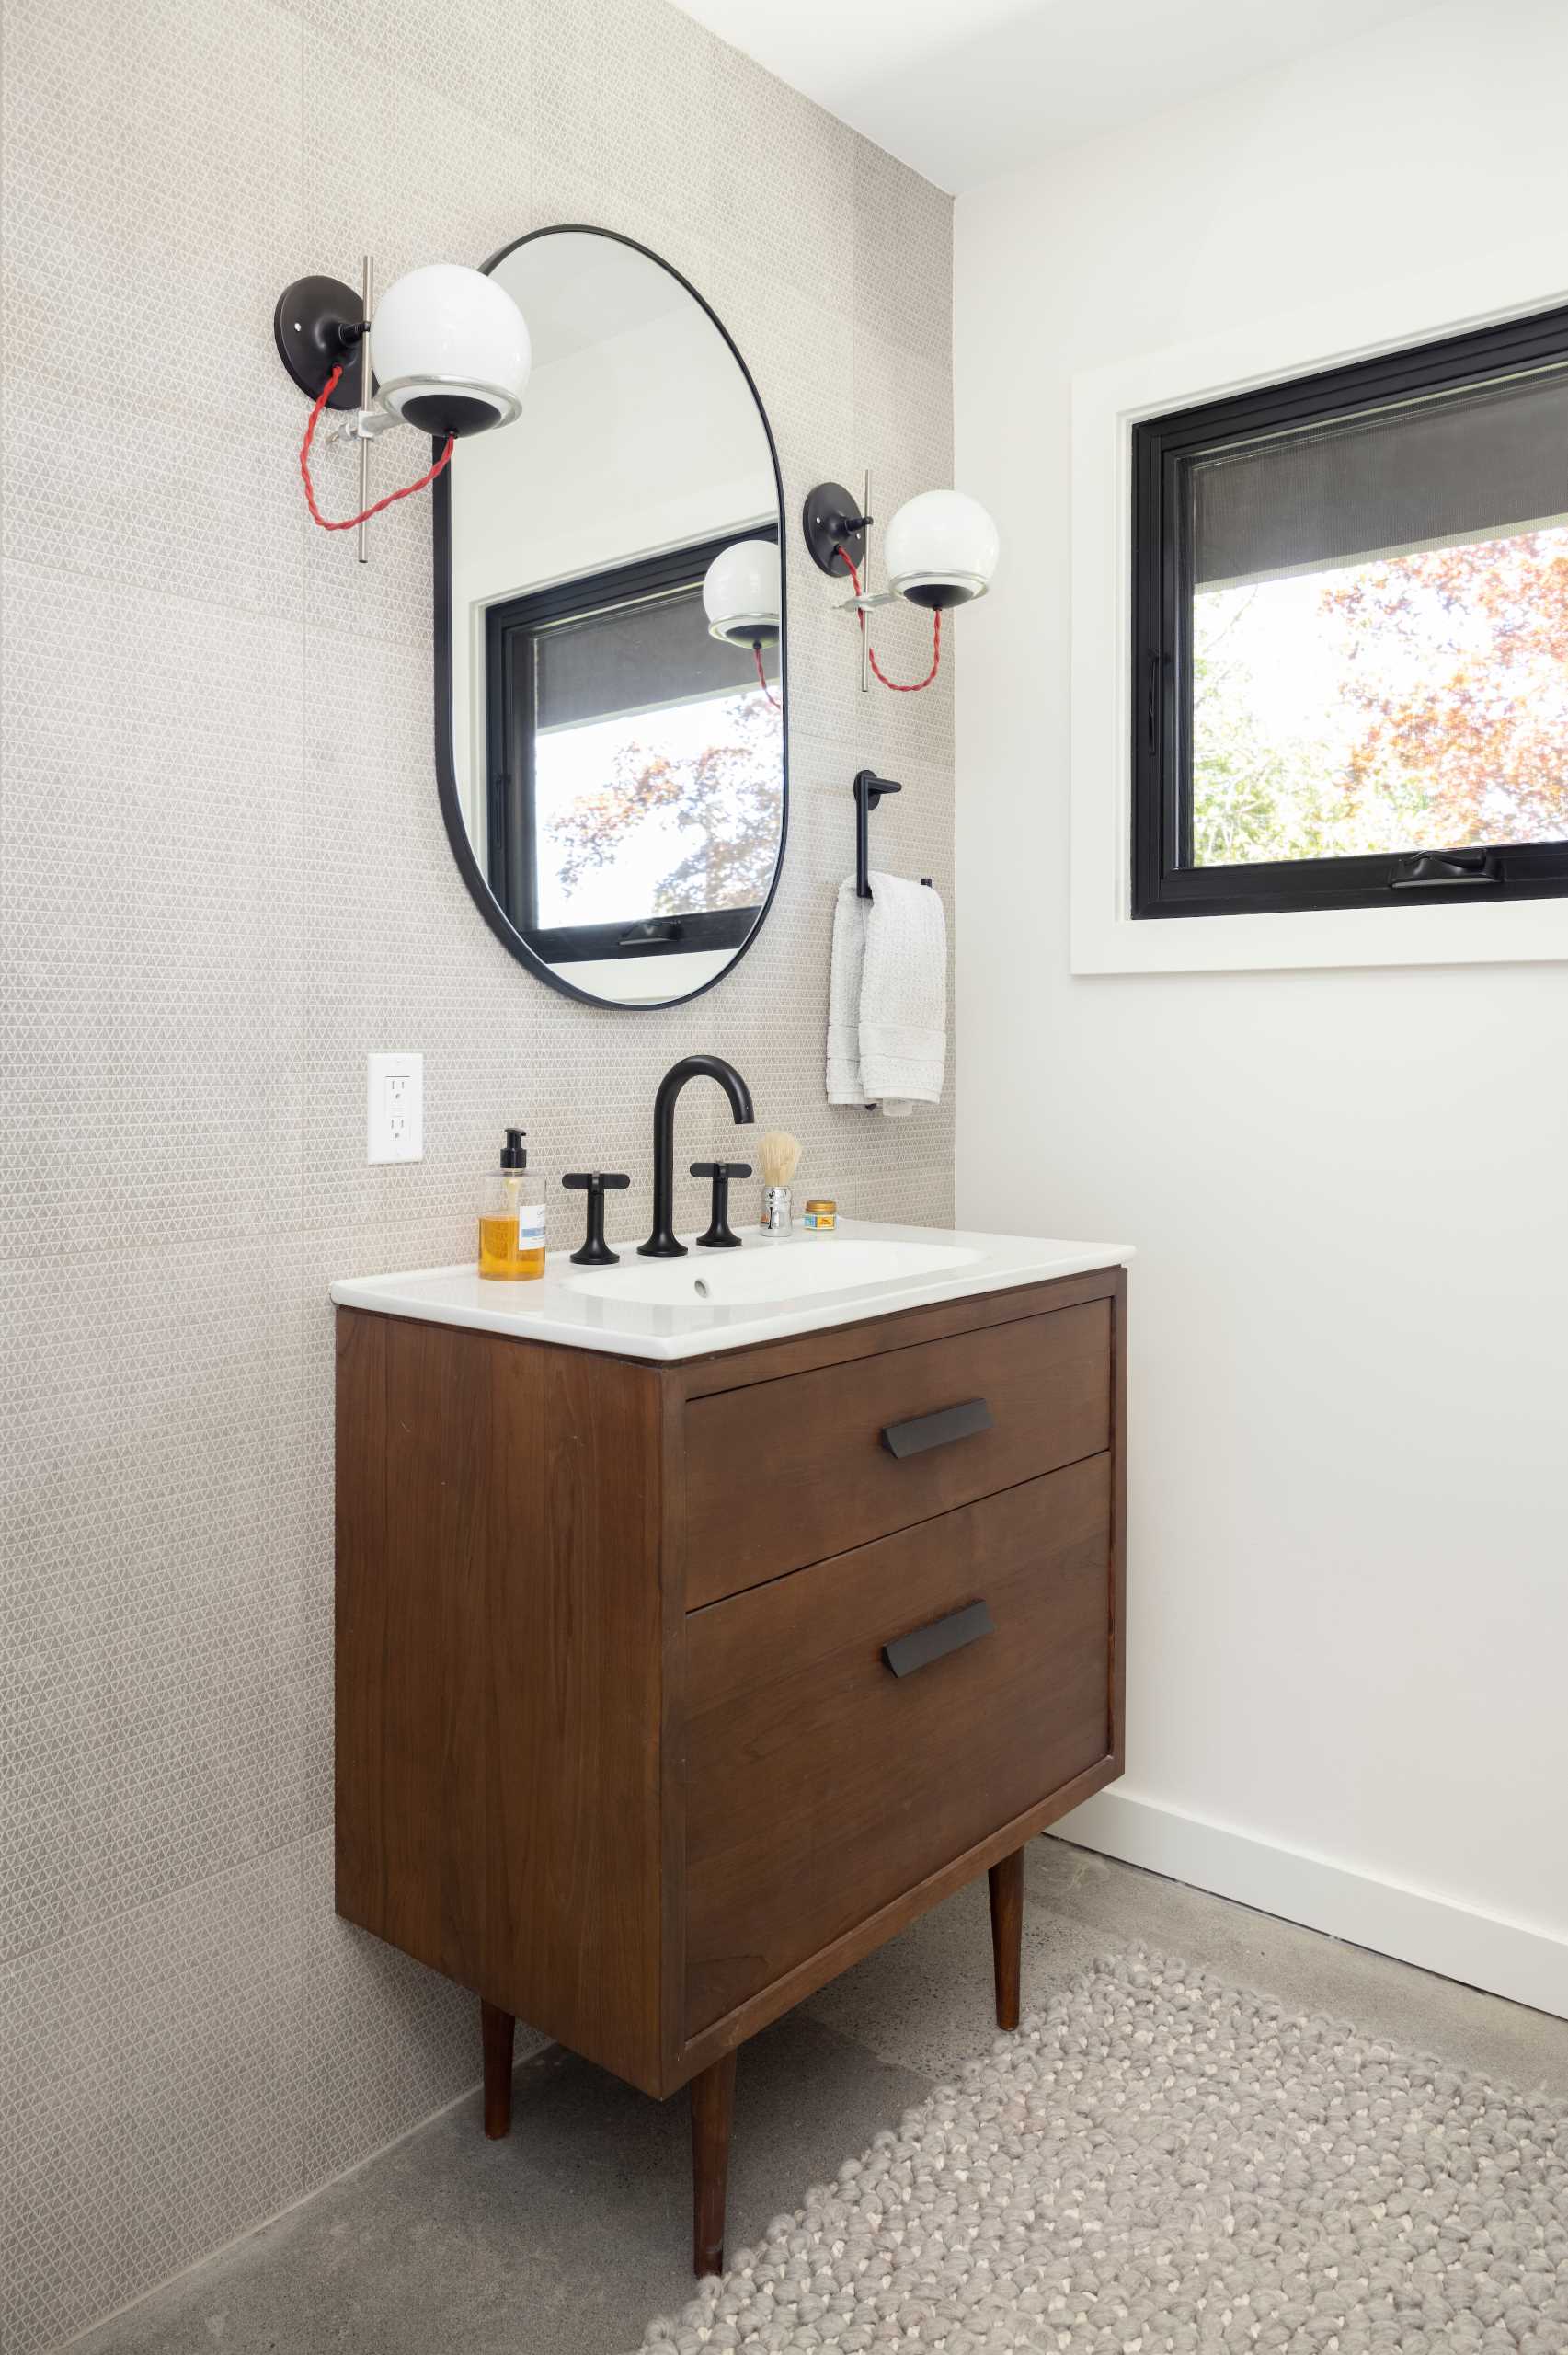 In this updated bathroom, a tiled wall creates a backdrop for the dark wood vanity, while a black-framed oval mirror complements the window frame.